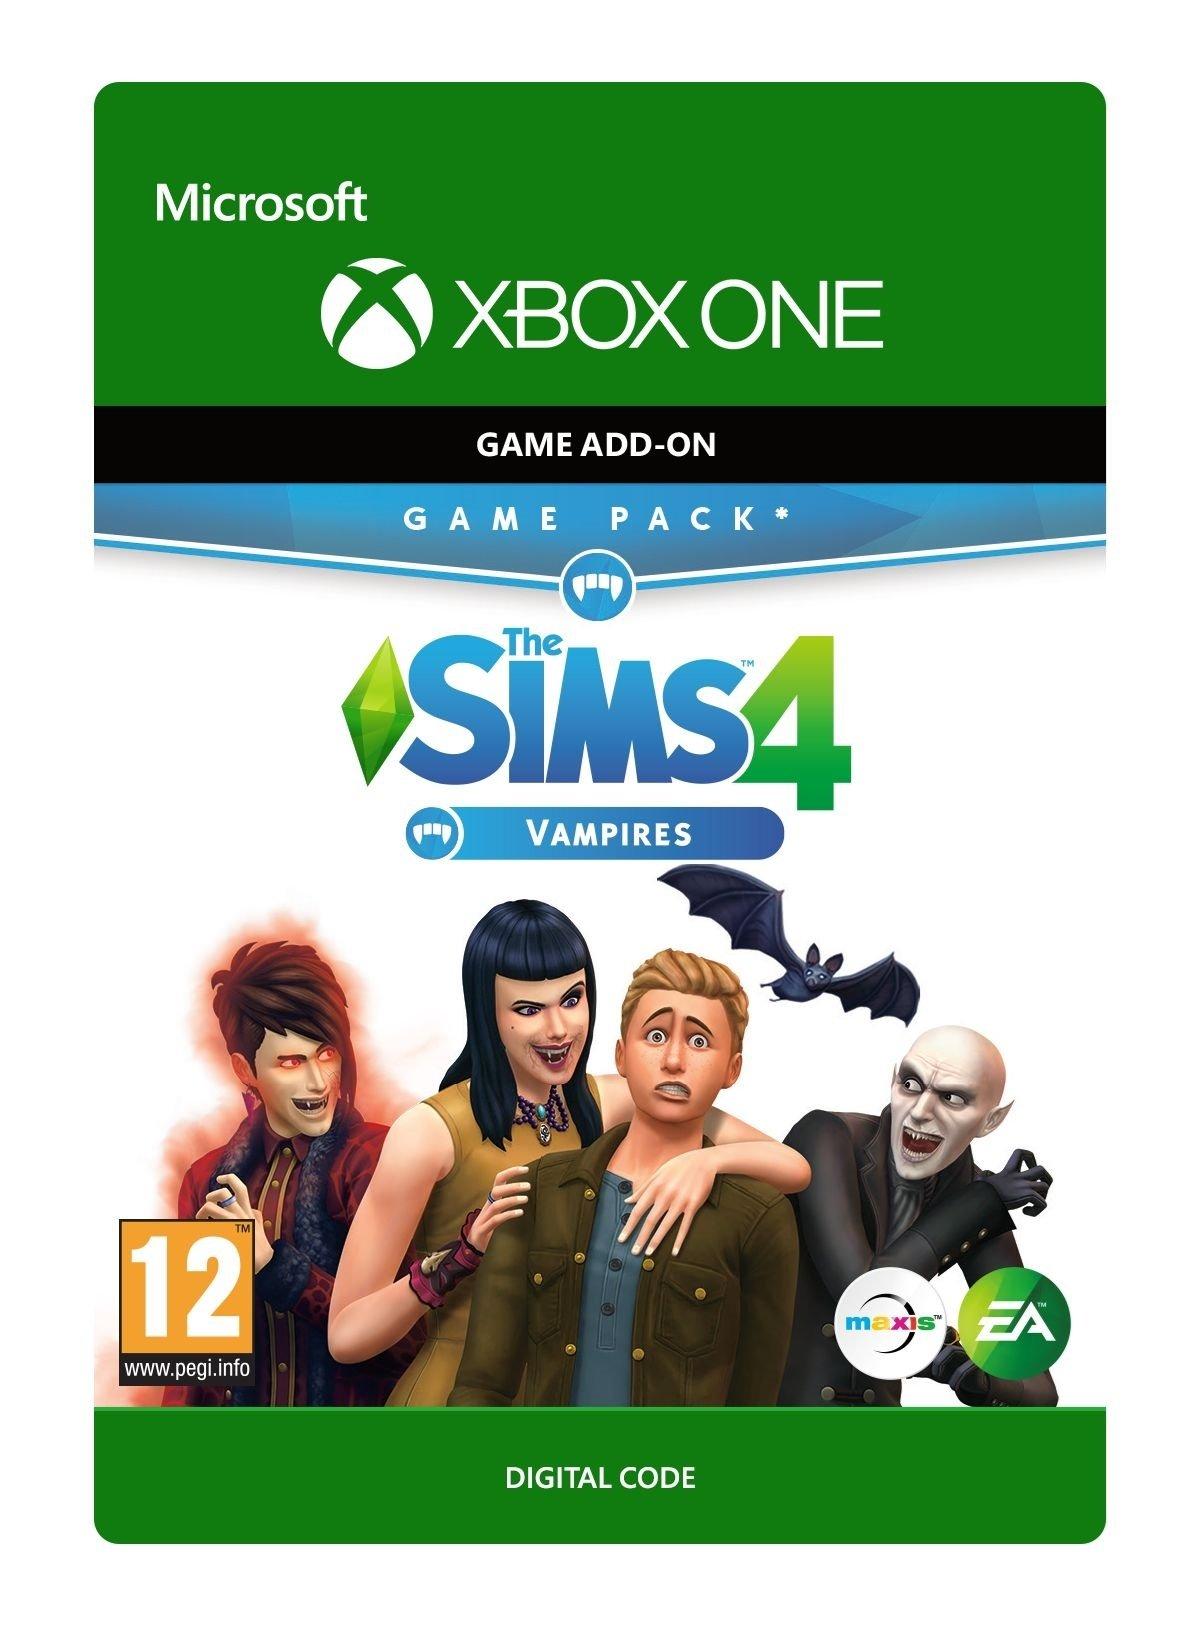 The Sims 4: Vampires - Xbox One - Add-on | 7D4-00224 (ce25db78-0c22-4cf2-a180-b0d18aa7f867)